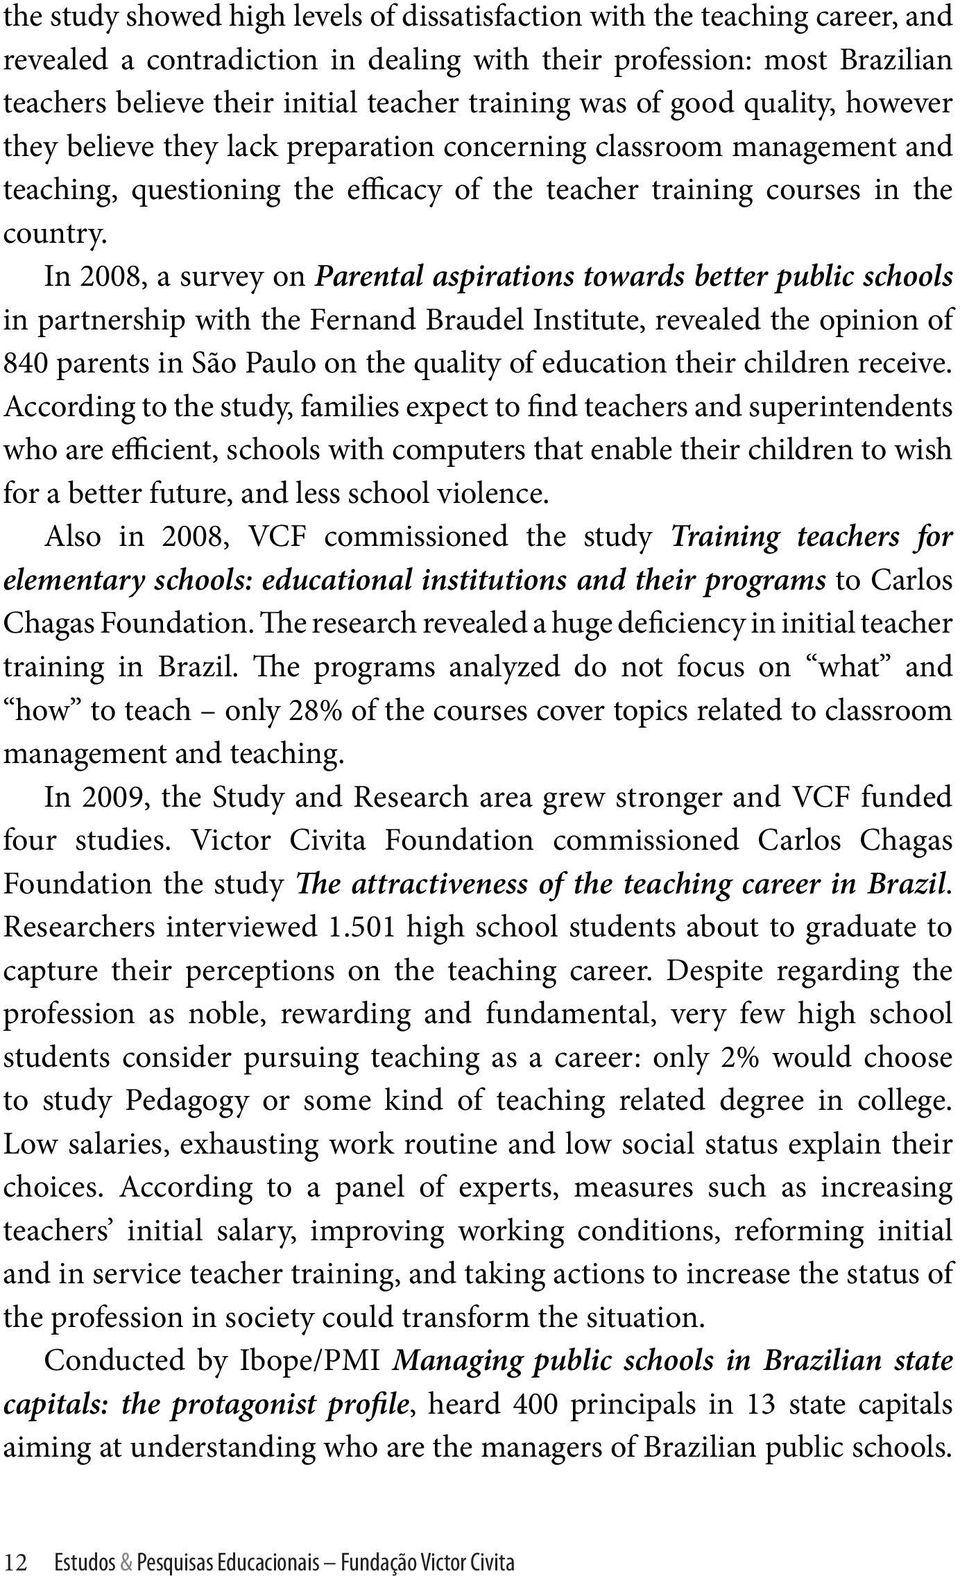 In 2008, a survey on Parental aspirations towards better public schools in partnership with the Fernand Braudel Institute, revealed the opinion of 840 parents in São Paulo on the quality of education